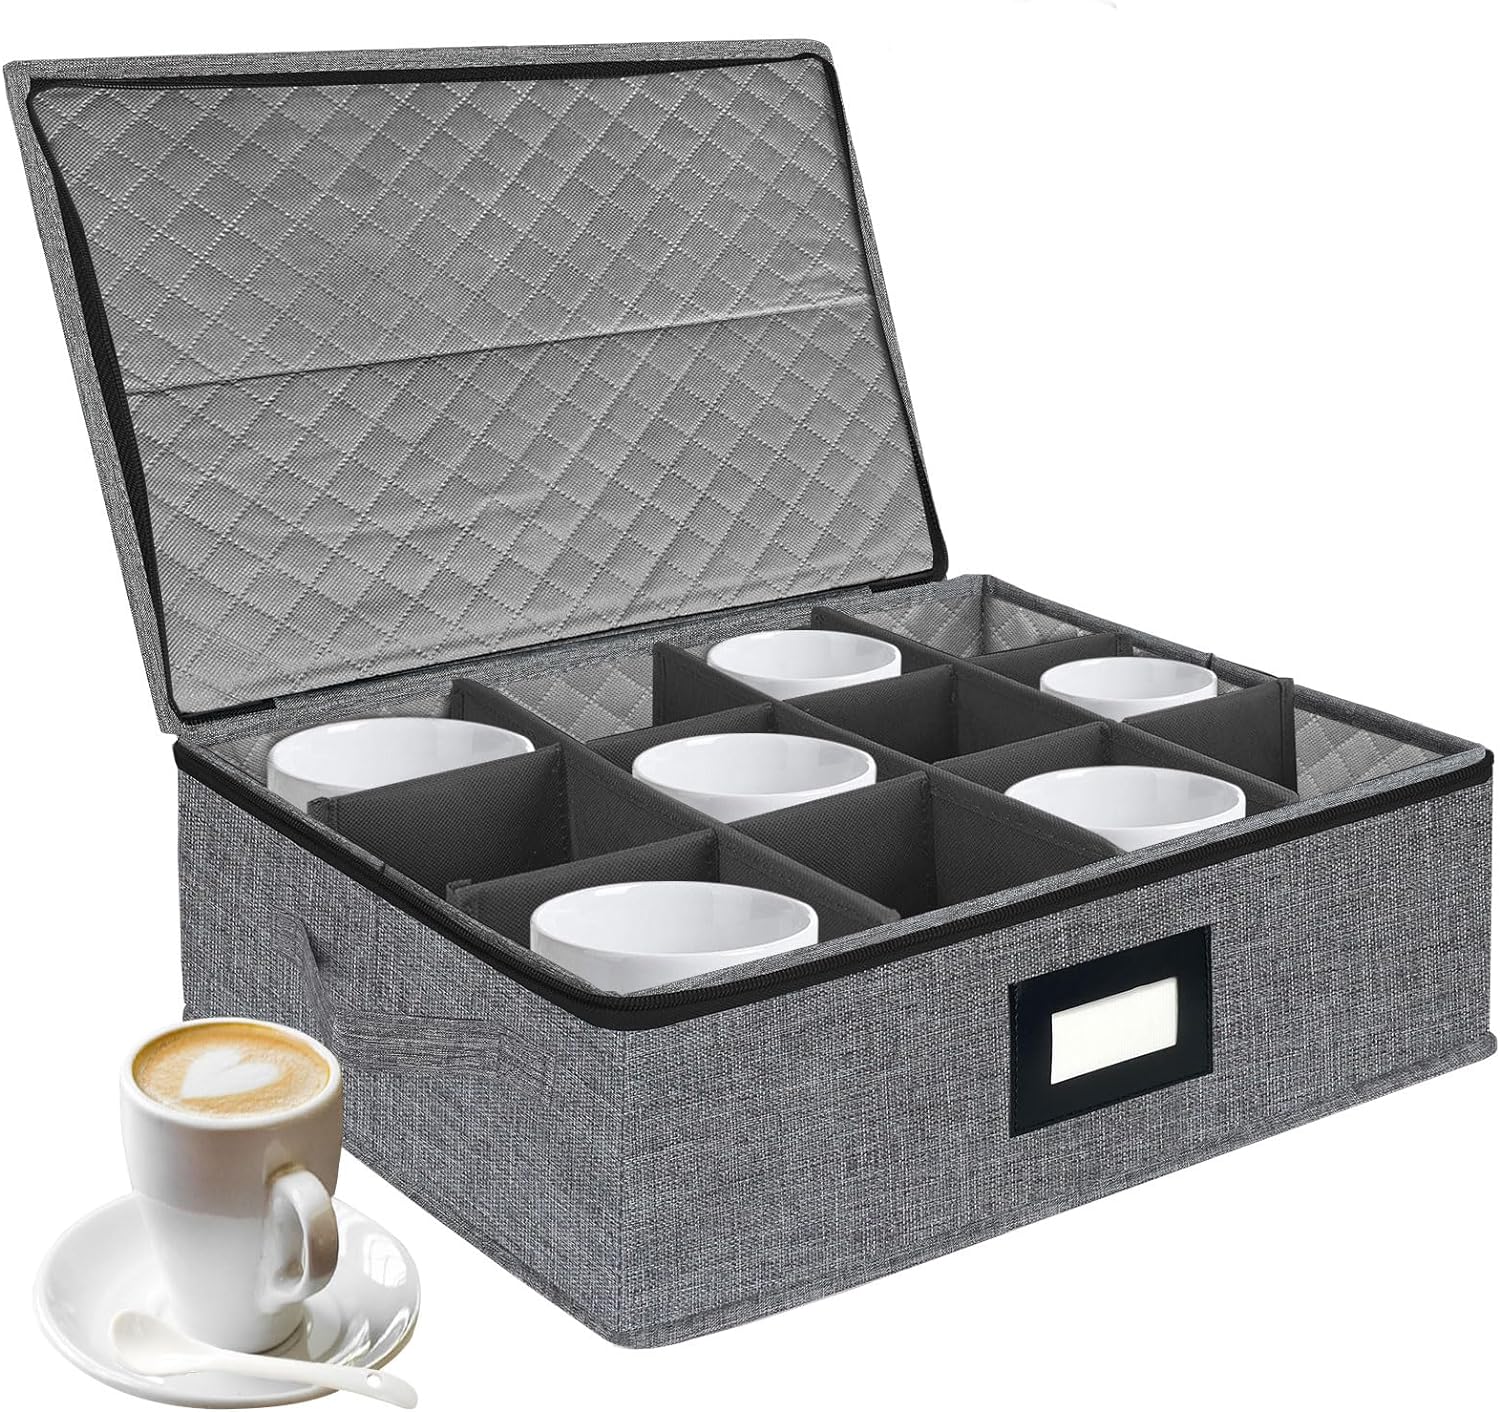 VERONLY Quilted Cup and Mug Storage Box, China Storage Containers with Zipper Lid and Handles, Holds 12 Coffee Mugs and Tea Cups, Hard Shell and Stackable for Dinnerware Storage, Transport (Dark Grey)